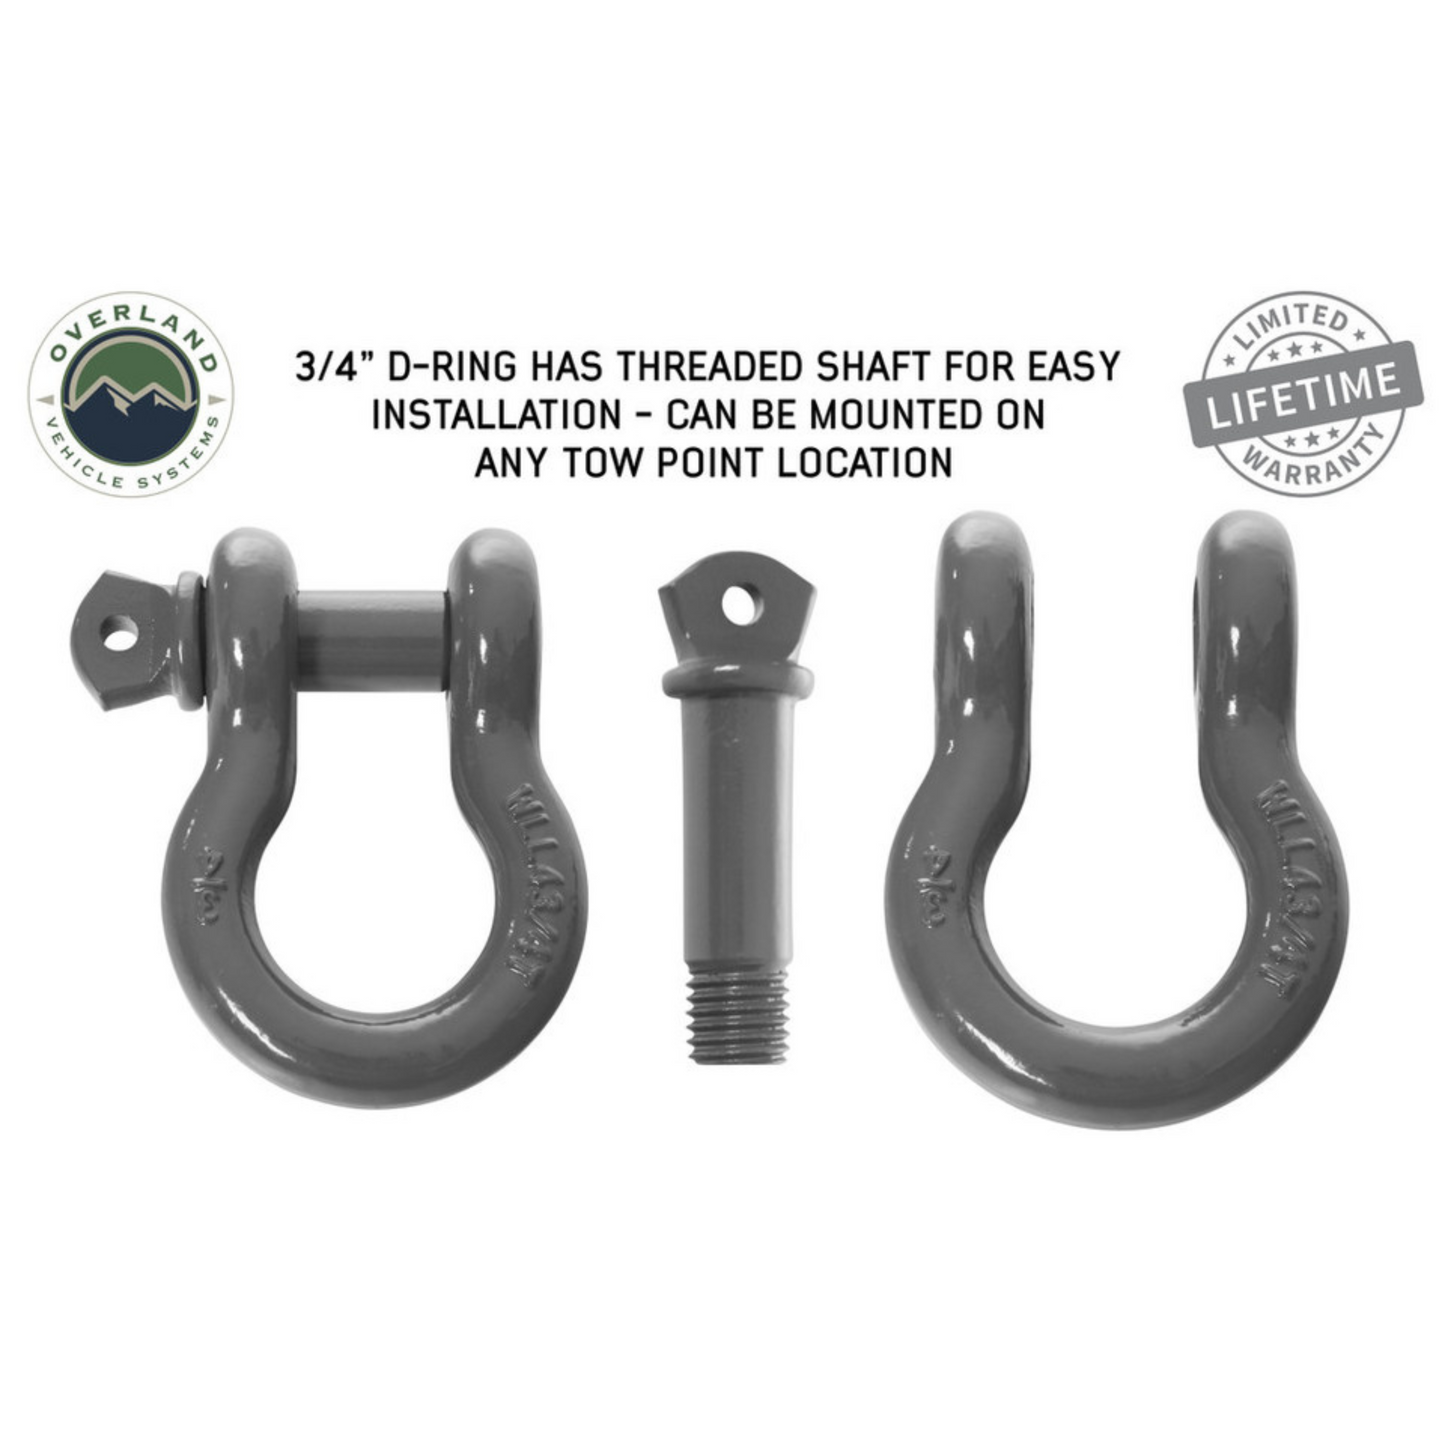 Heavy Duty 3/4" D-Ring Recovery Shackle - Grey Pair